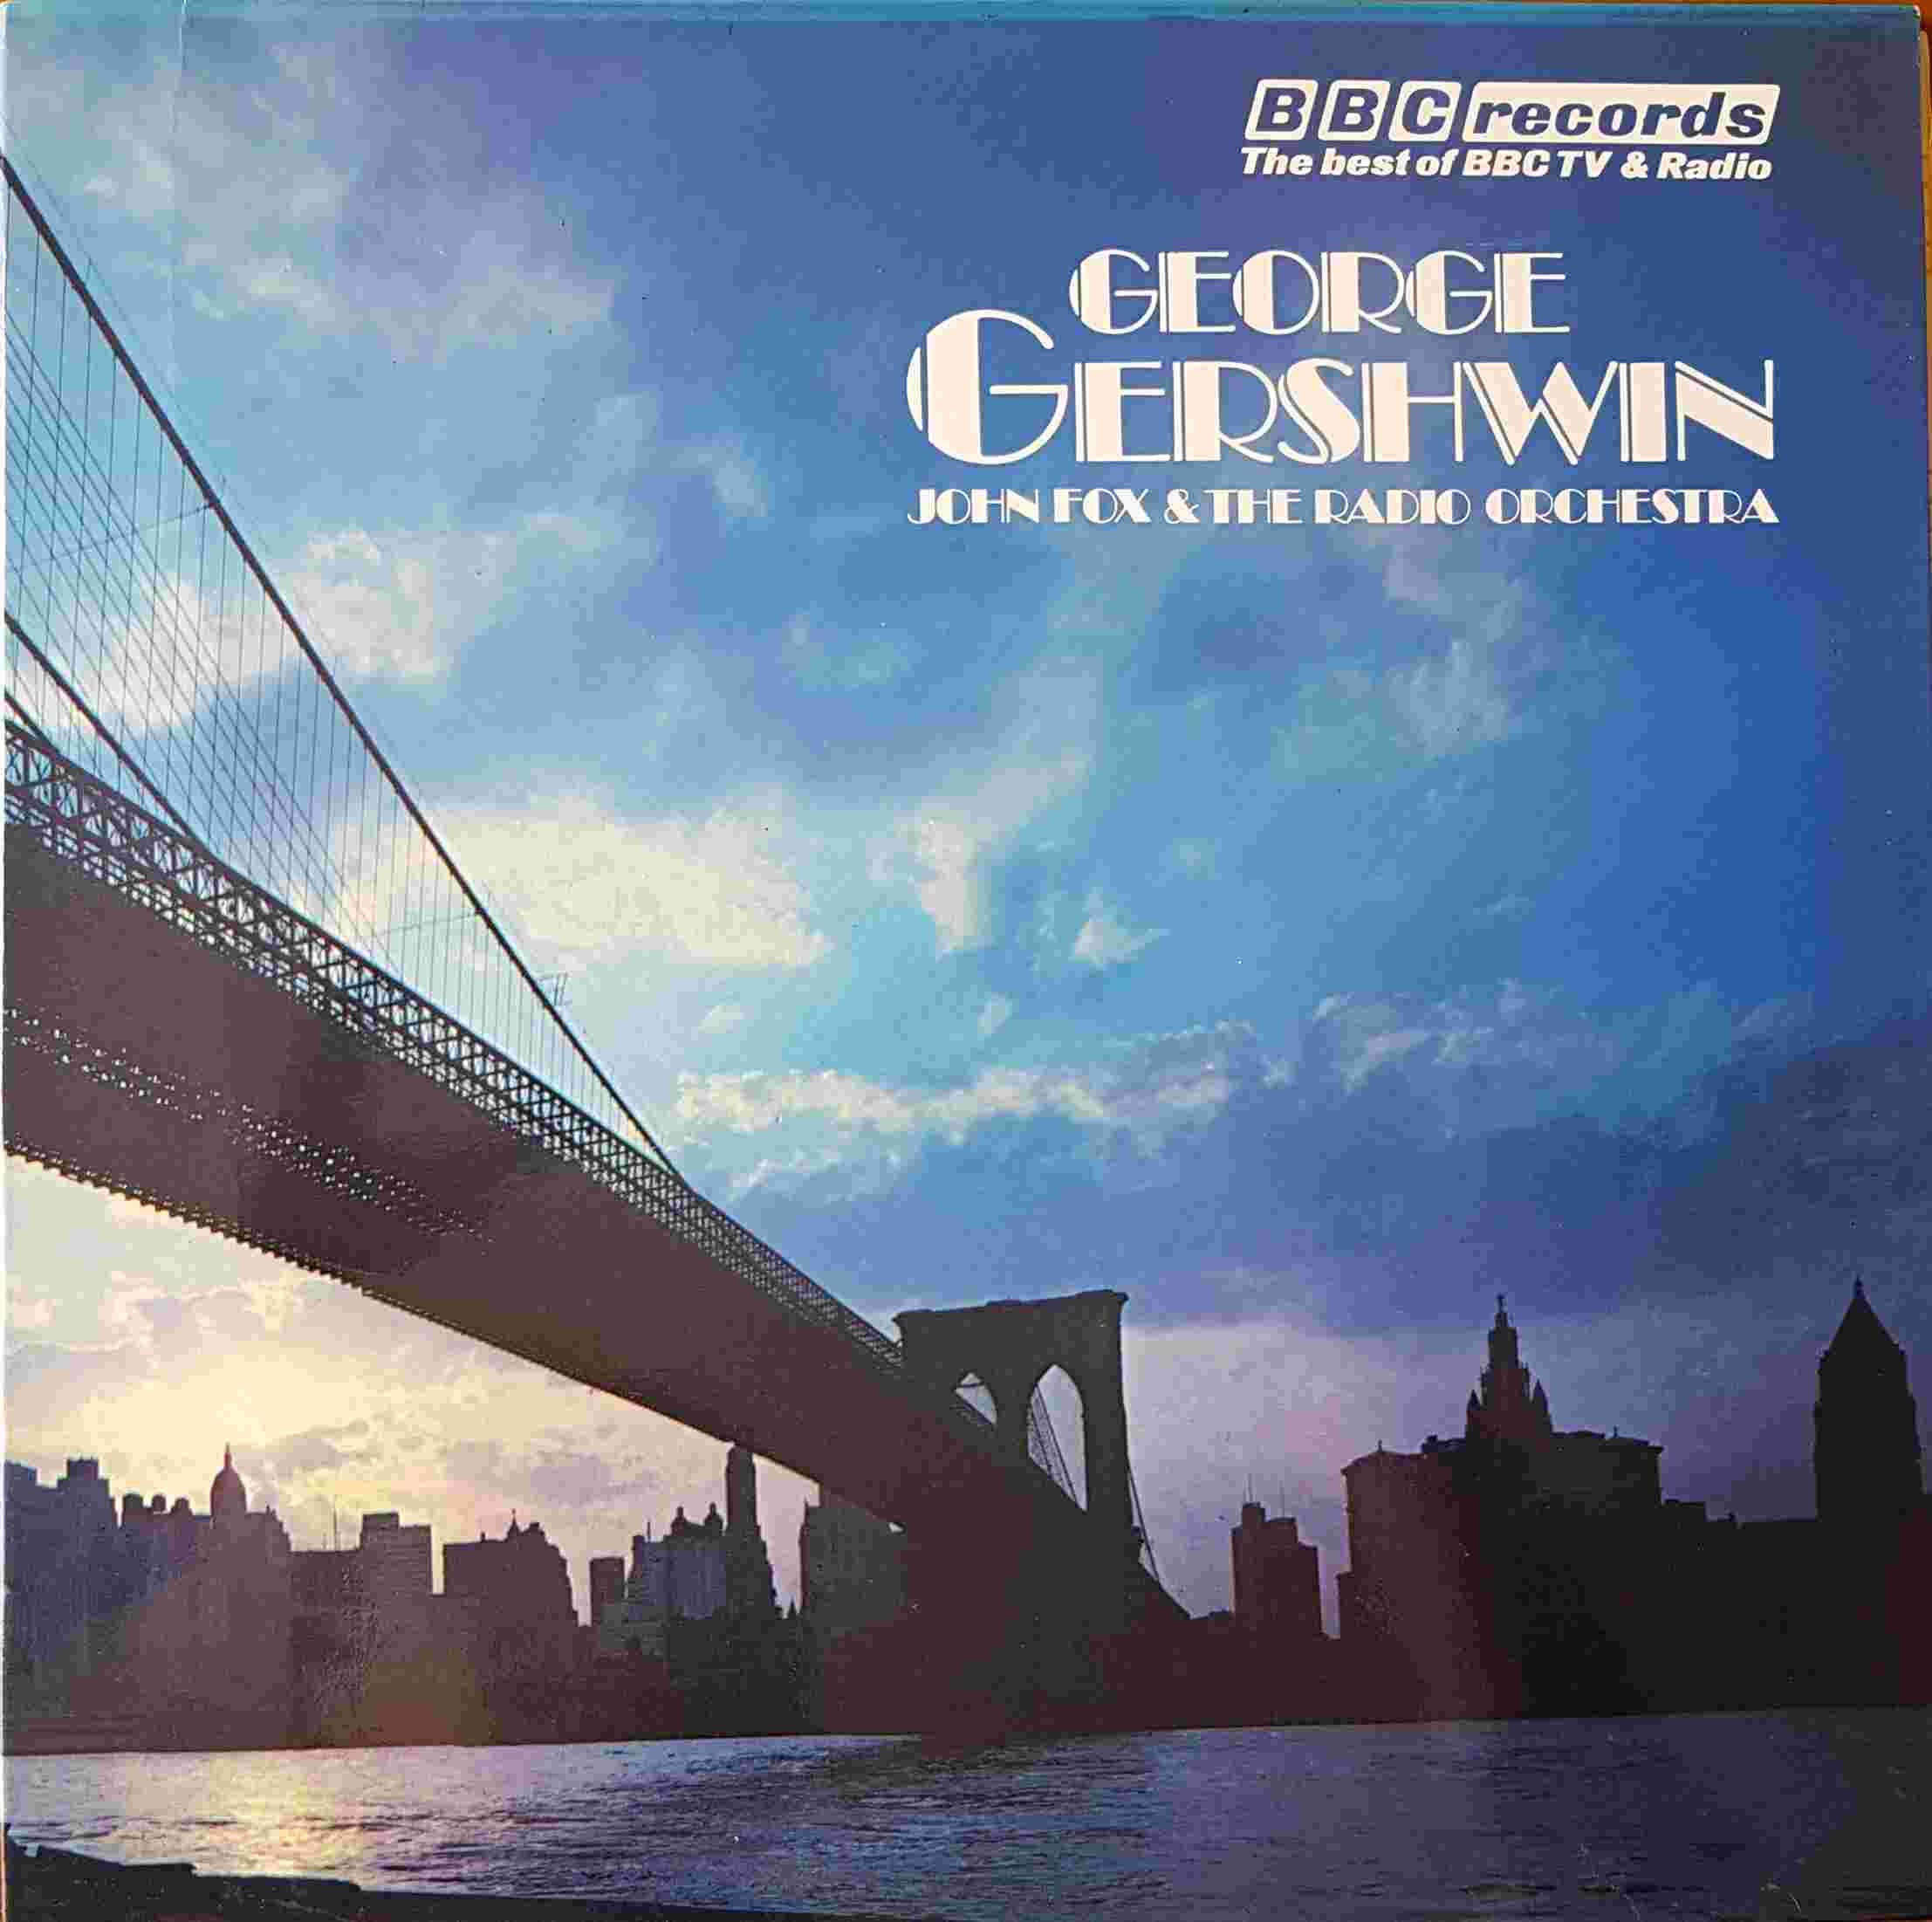 Picture of REB 156 George Gershwin by artist George Gershwin and the John Fox Radio Orchestra from the BBC albums - Records and Tapes library